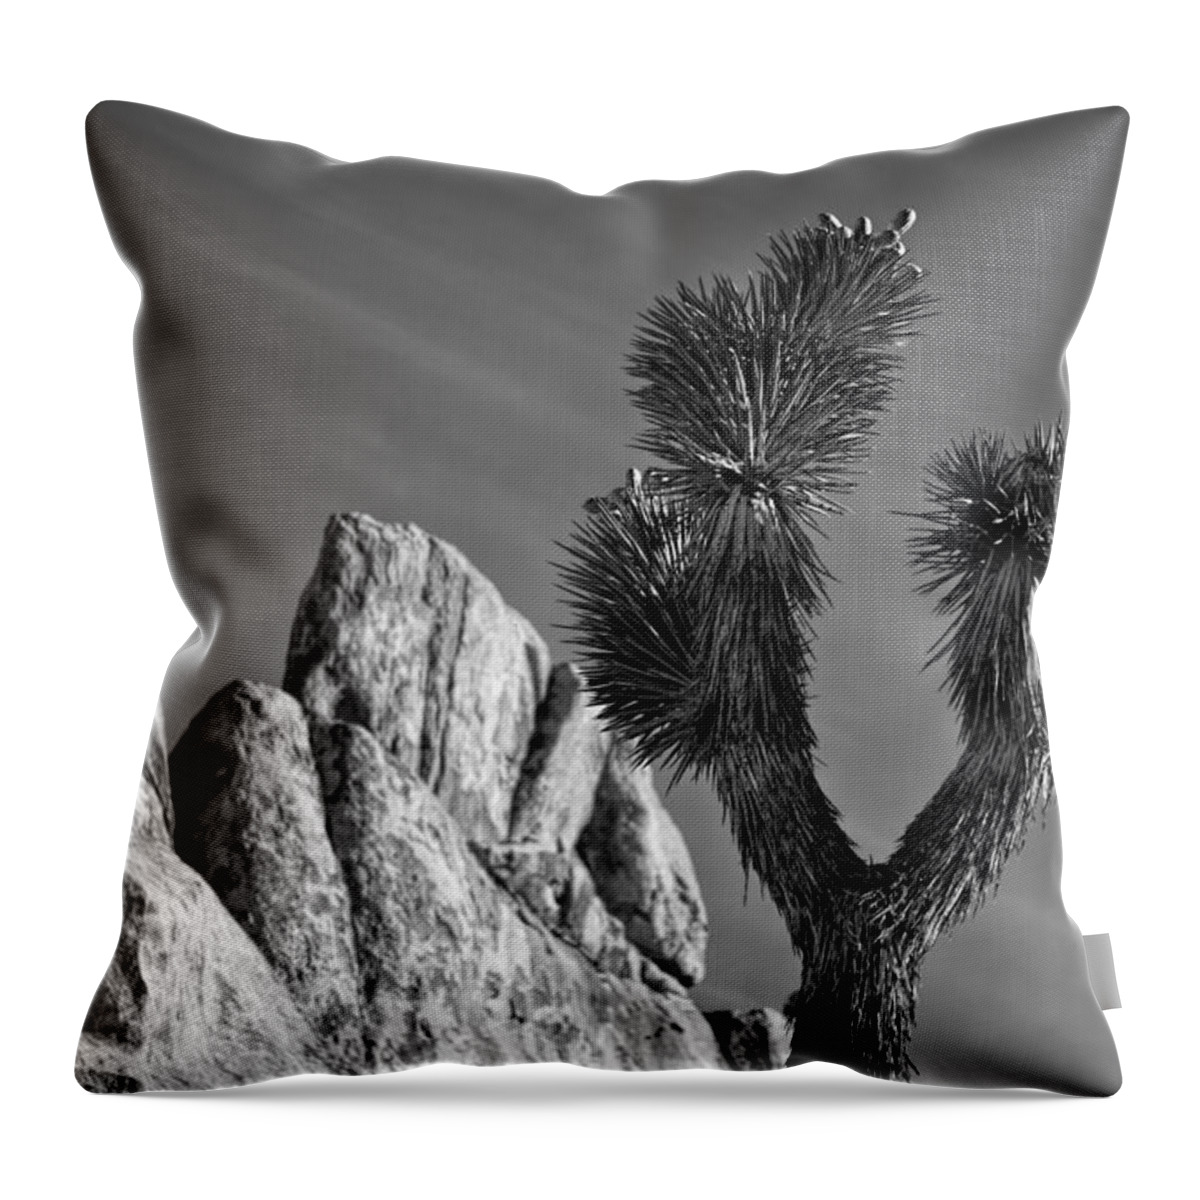 Black & White Throw Pillow featuring the photograph Tips by Peter Tellone